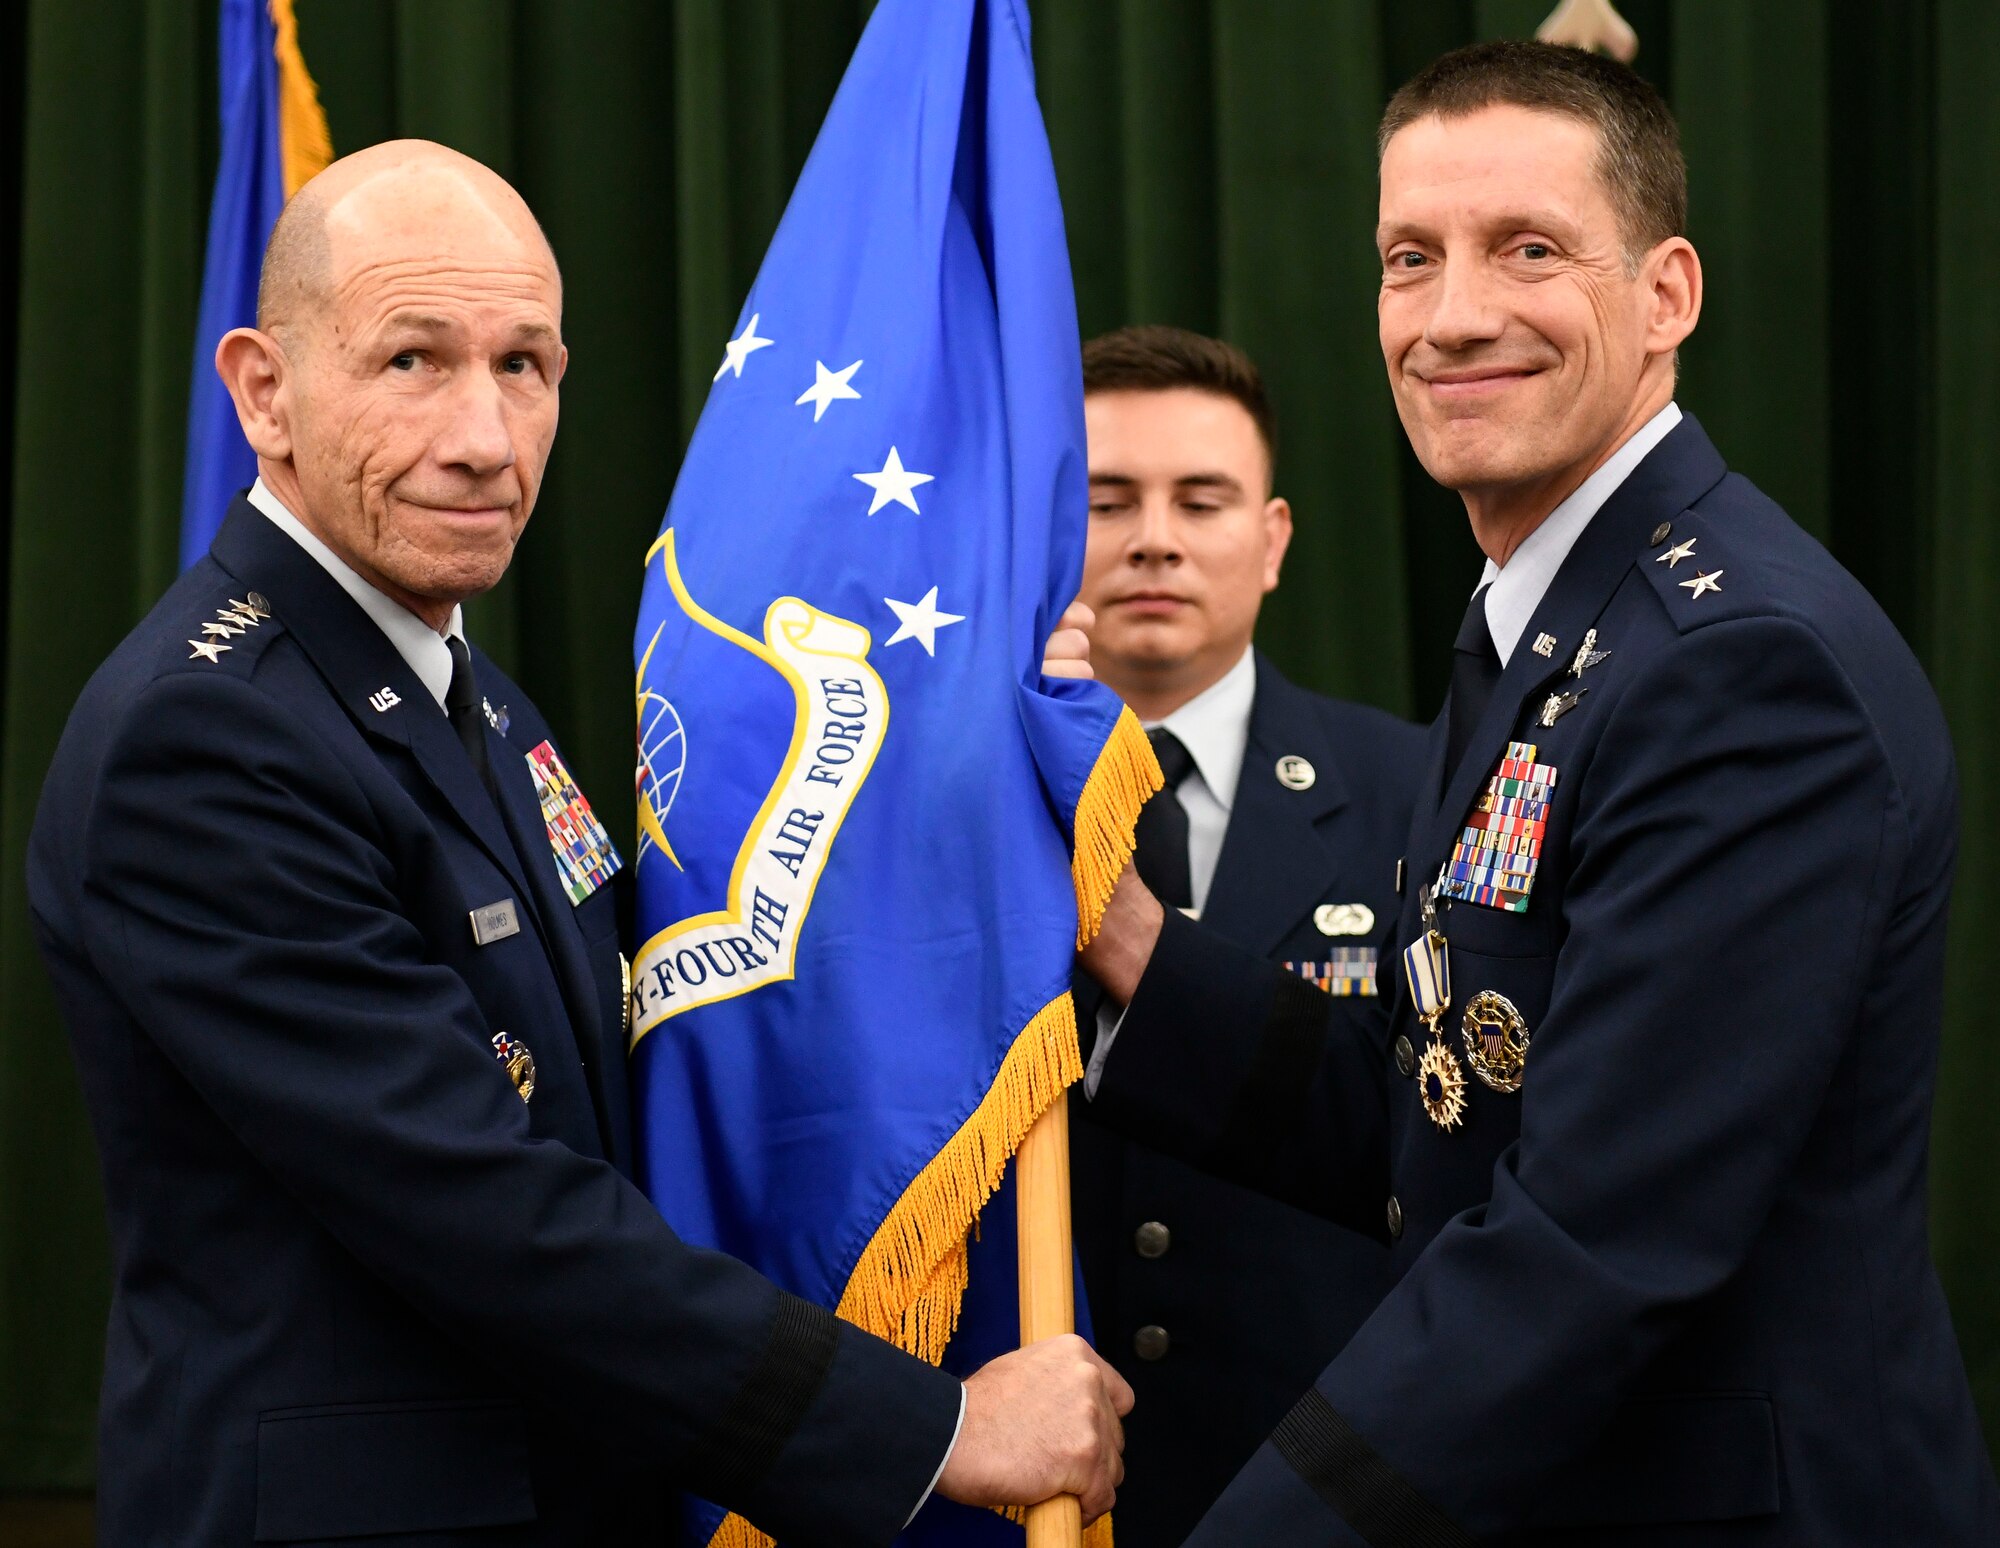 Maj. Gen. Robert Skinner (right) relinquishes command of Twenty-Fourth Air Force to Gen. Mike Holmes, commander of Air Combat Command, during the Sixteenth Air Force Assumption of Command at Joint Base San Antonio-Lackland, Texas, Oct. 11, 2019. Twenty-Fourth and Twenty-Fifth Air Forces were inactivated during the ceremony to integrate into the new information warfare Numbered Air Force. Sixteenth Air Force is responsible for providing IW capabilities to combatant commanders with the speed to match today’s technological environment. (U.S. Air Force photo by Tech. Sgt. R.J. Biermann)